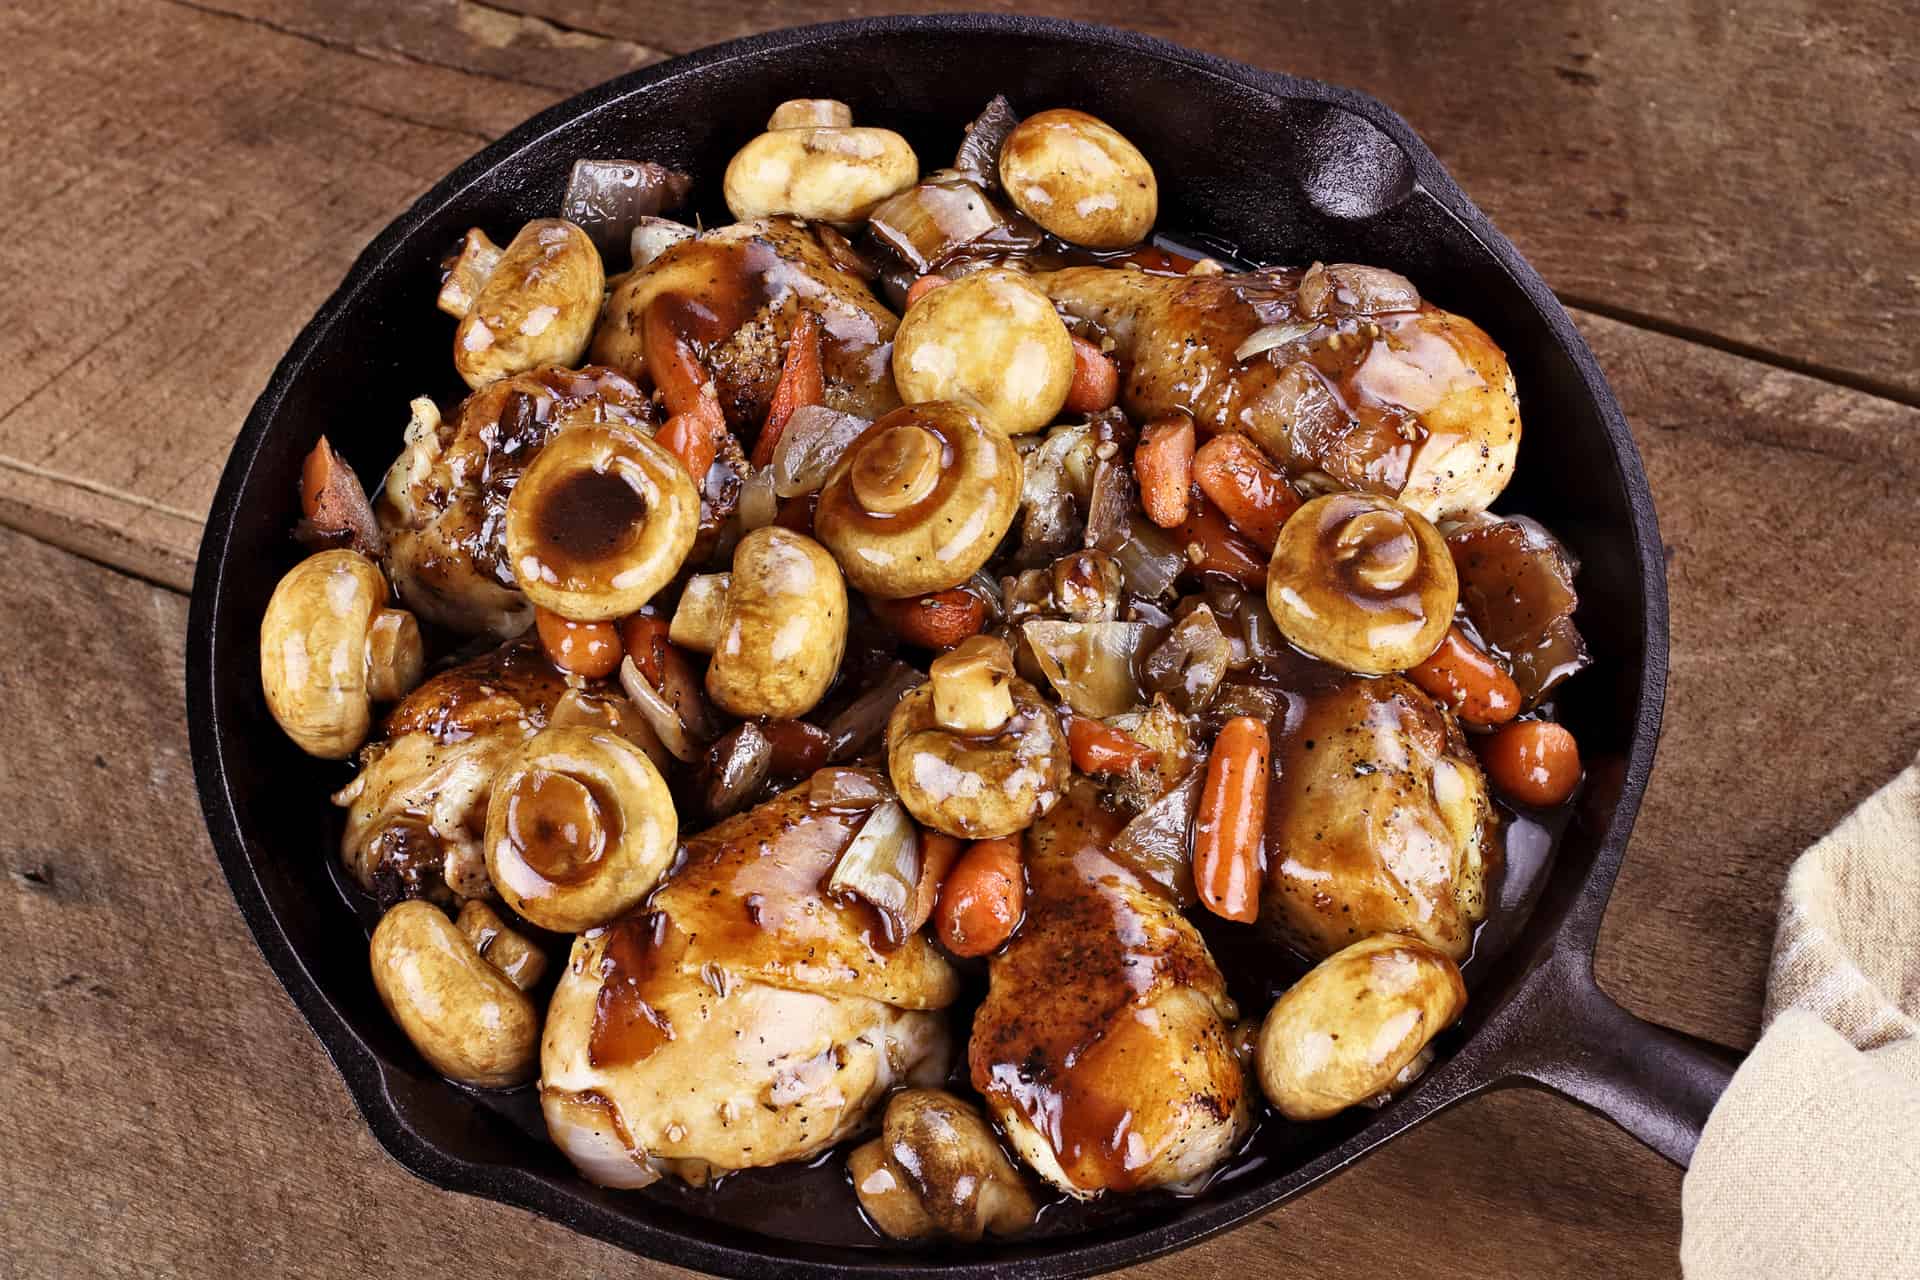 Coq Au Vin in rustic cast iron pan with shallow depth of field.